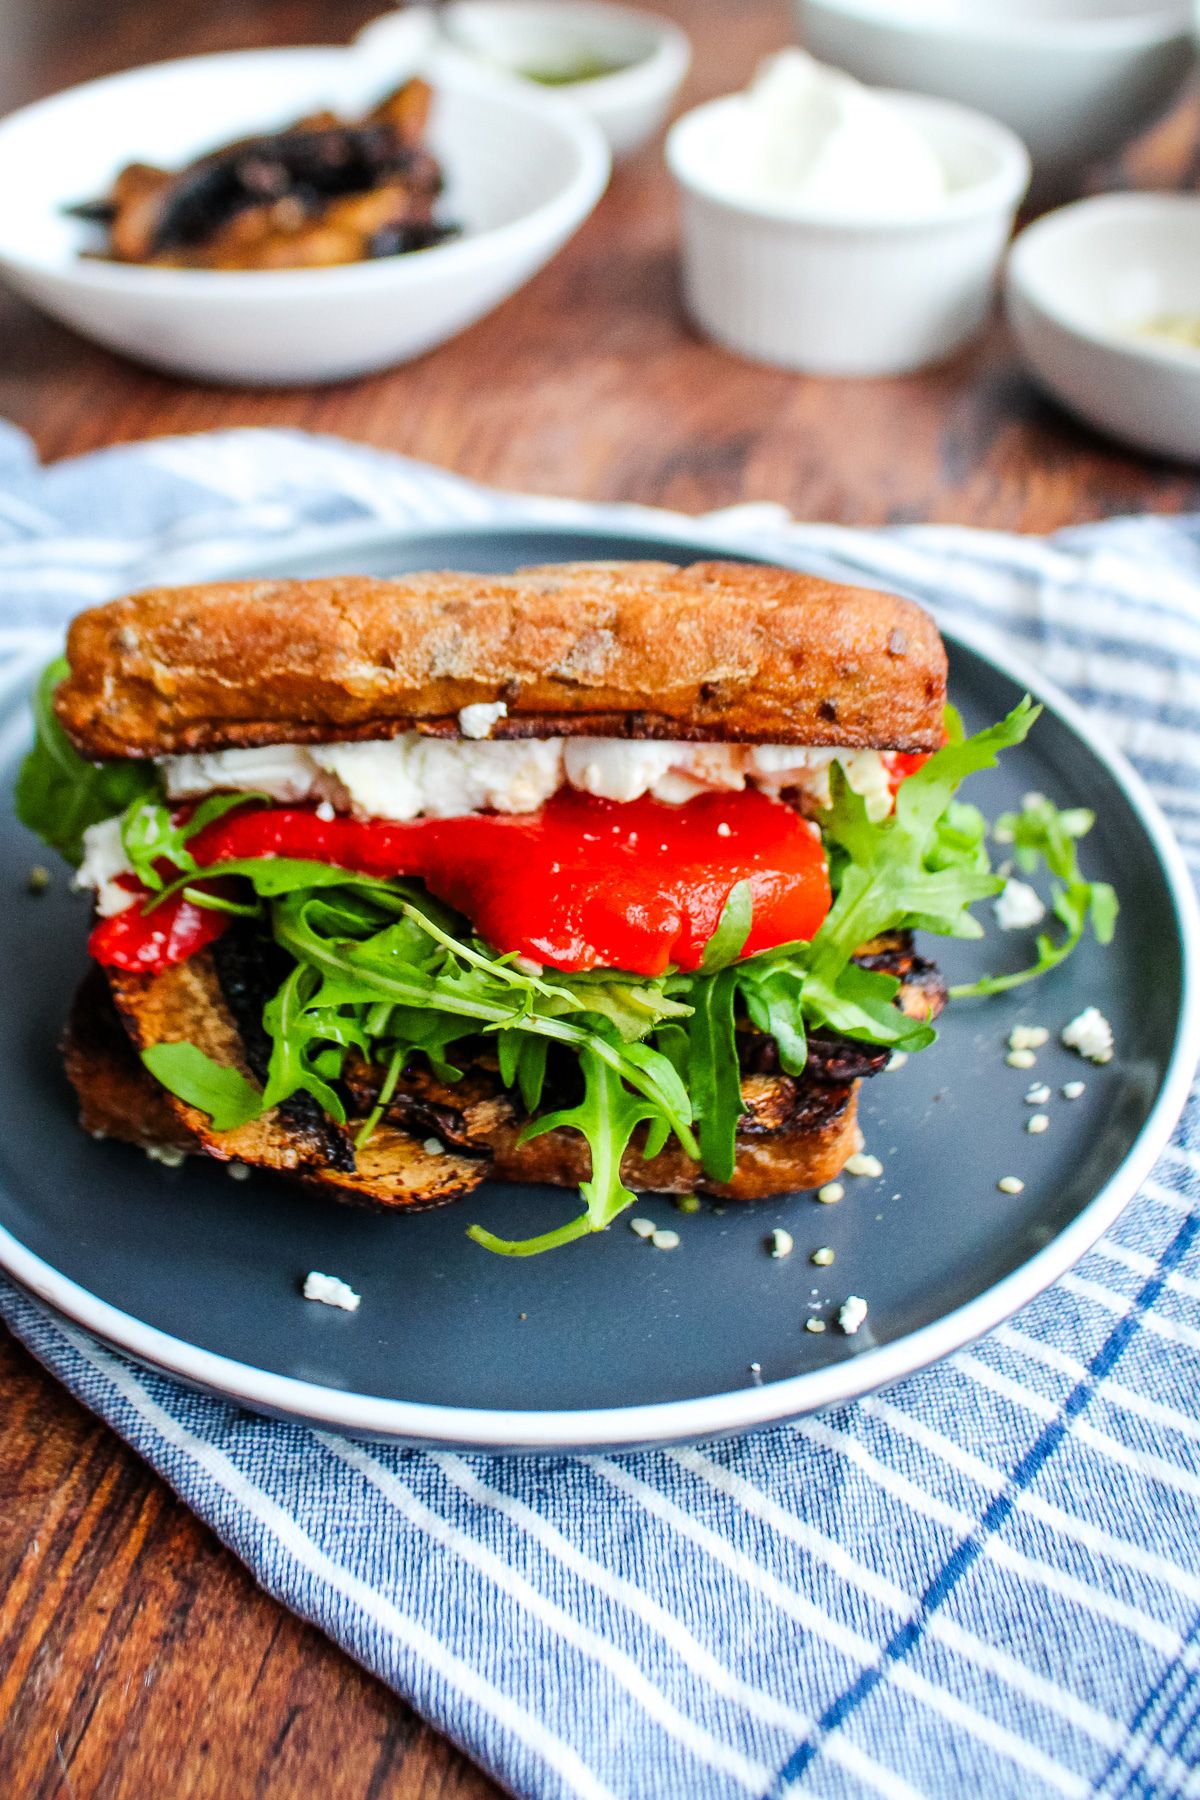 A portobello mushroom sandwich on a blue plate with bowls of ingredients in the background.